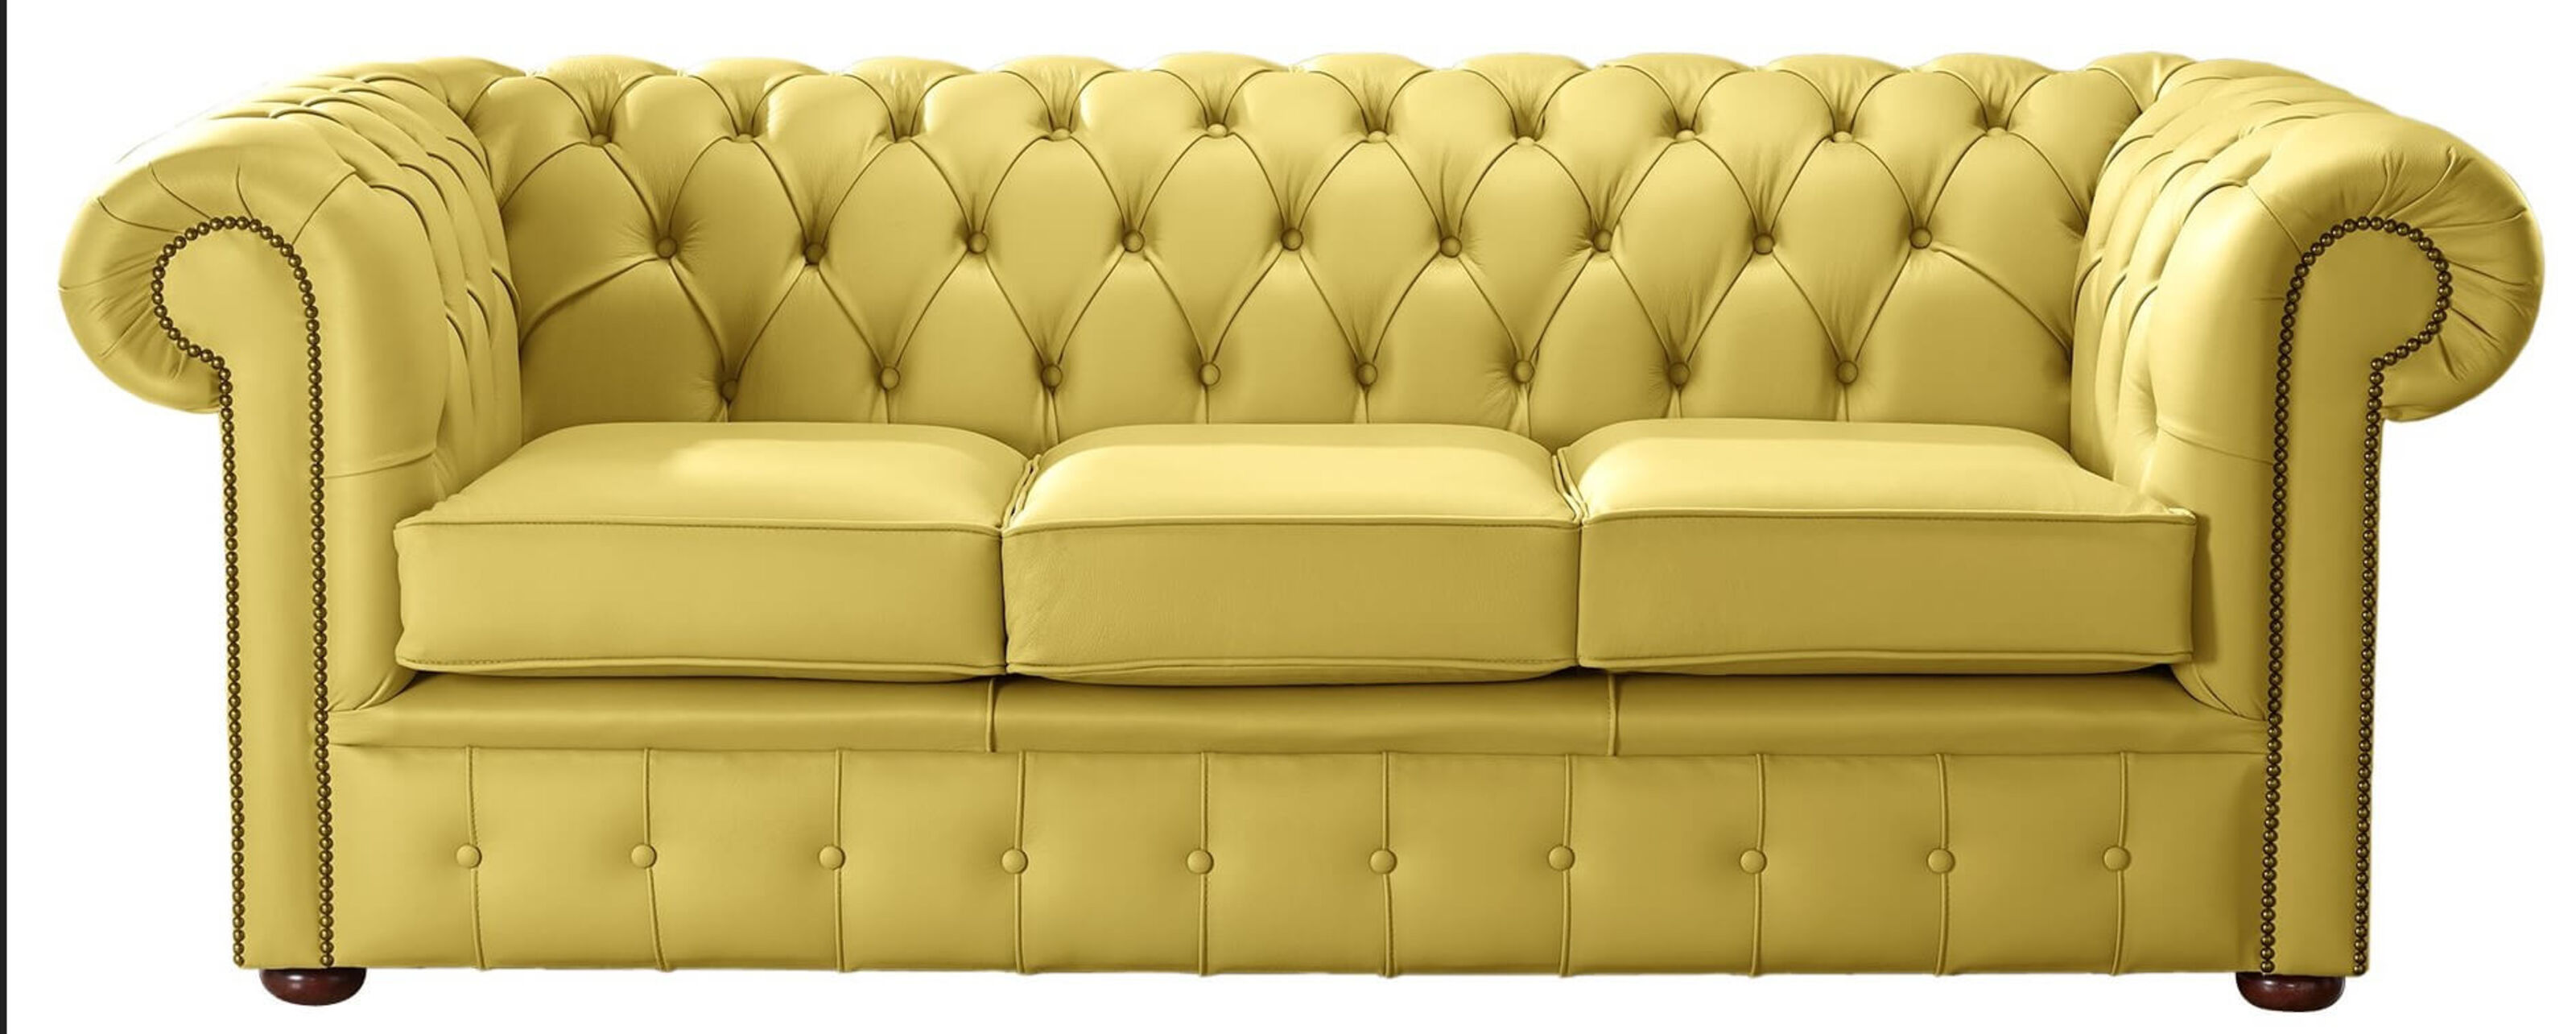 Stylish Chesterfield Sofas for Sale in Kuala Lumpur  %Post Title